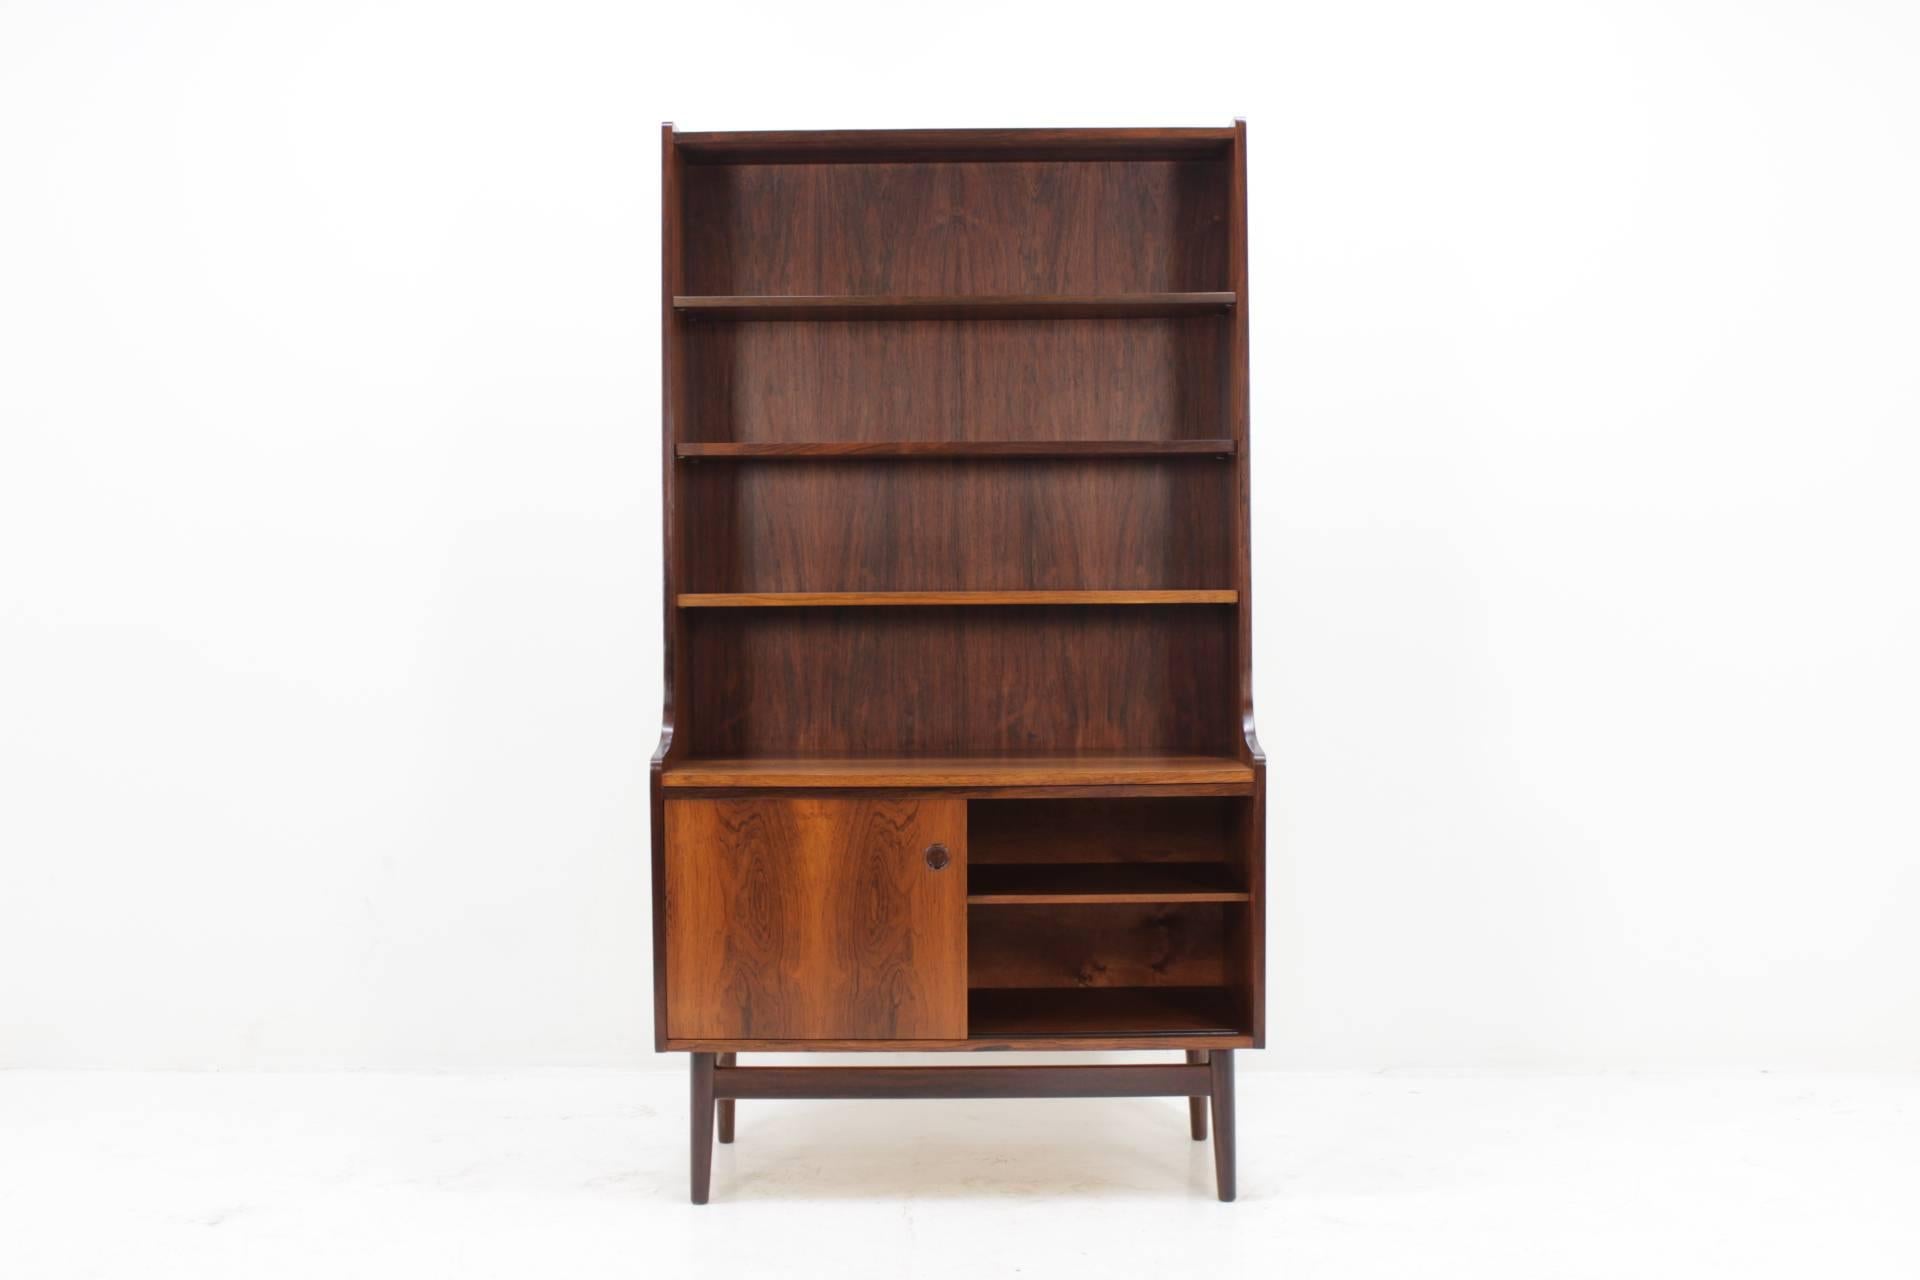 His cabinet features two sliding doors, and three adjustable shelves for books. The item was carefully restored.